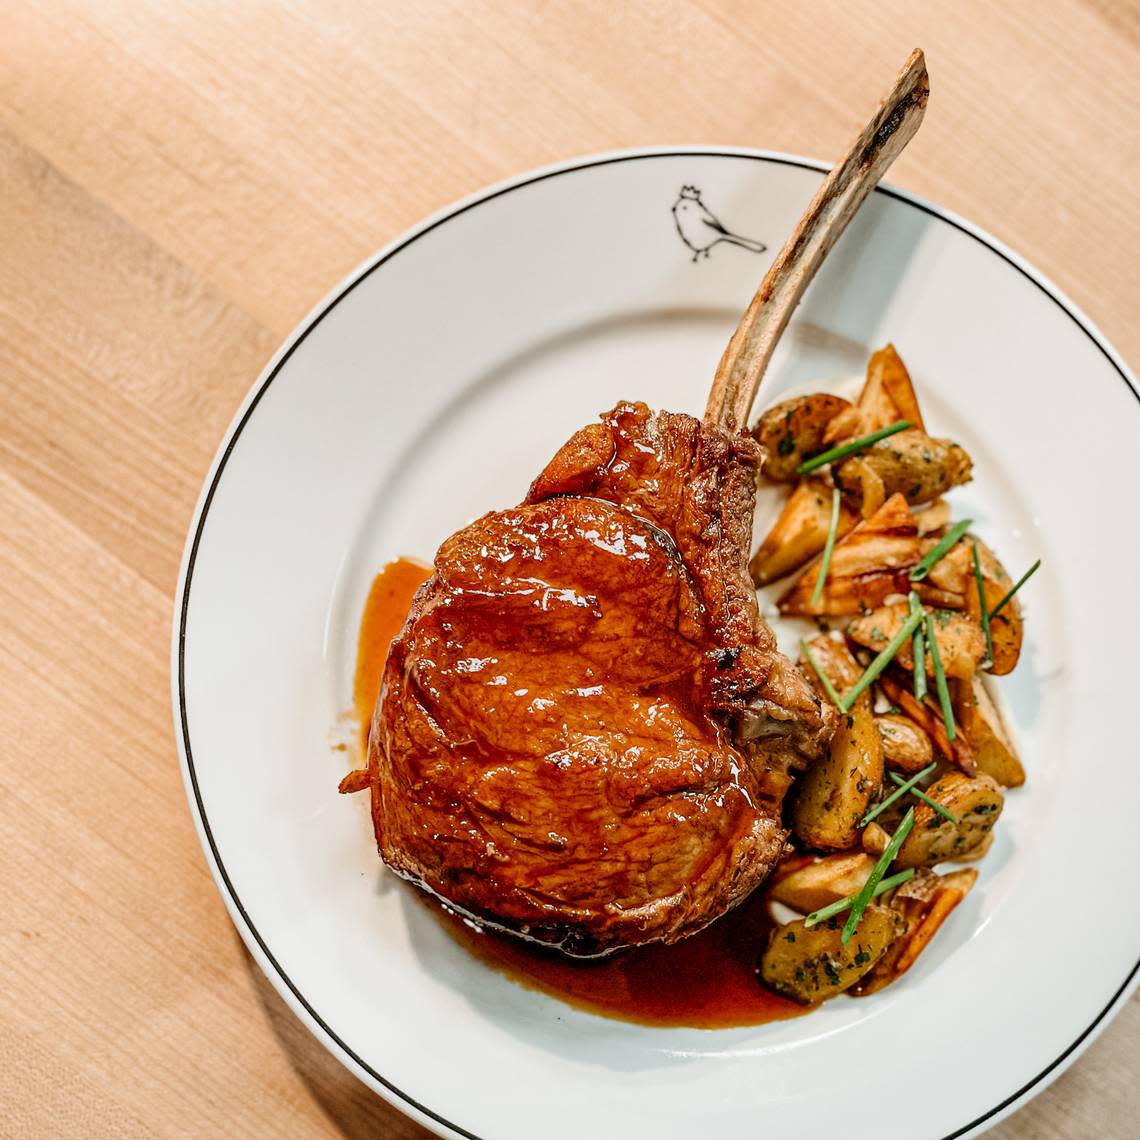 A massive veal chop from Bluebird in Chapel Hill, the winner of the News & Observer’s Best New Restaurant Bracket.